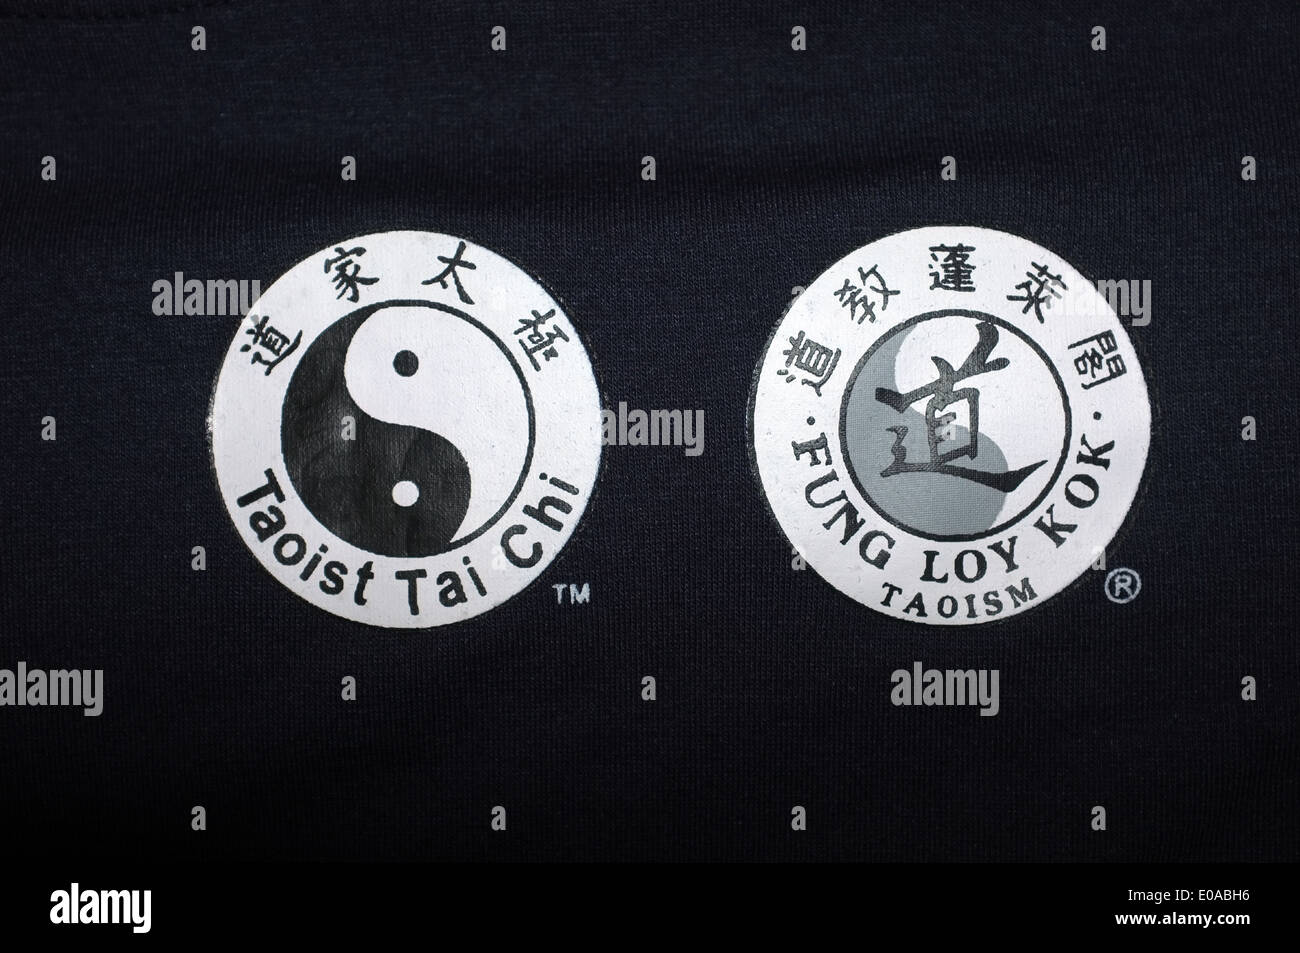 The Ying and Yang logo for the international Taoist Tai Chi movement founded by Master Moy Lin-shin. Stock Photo